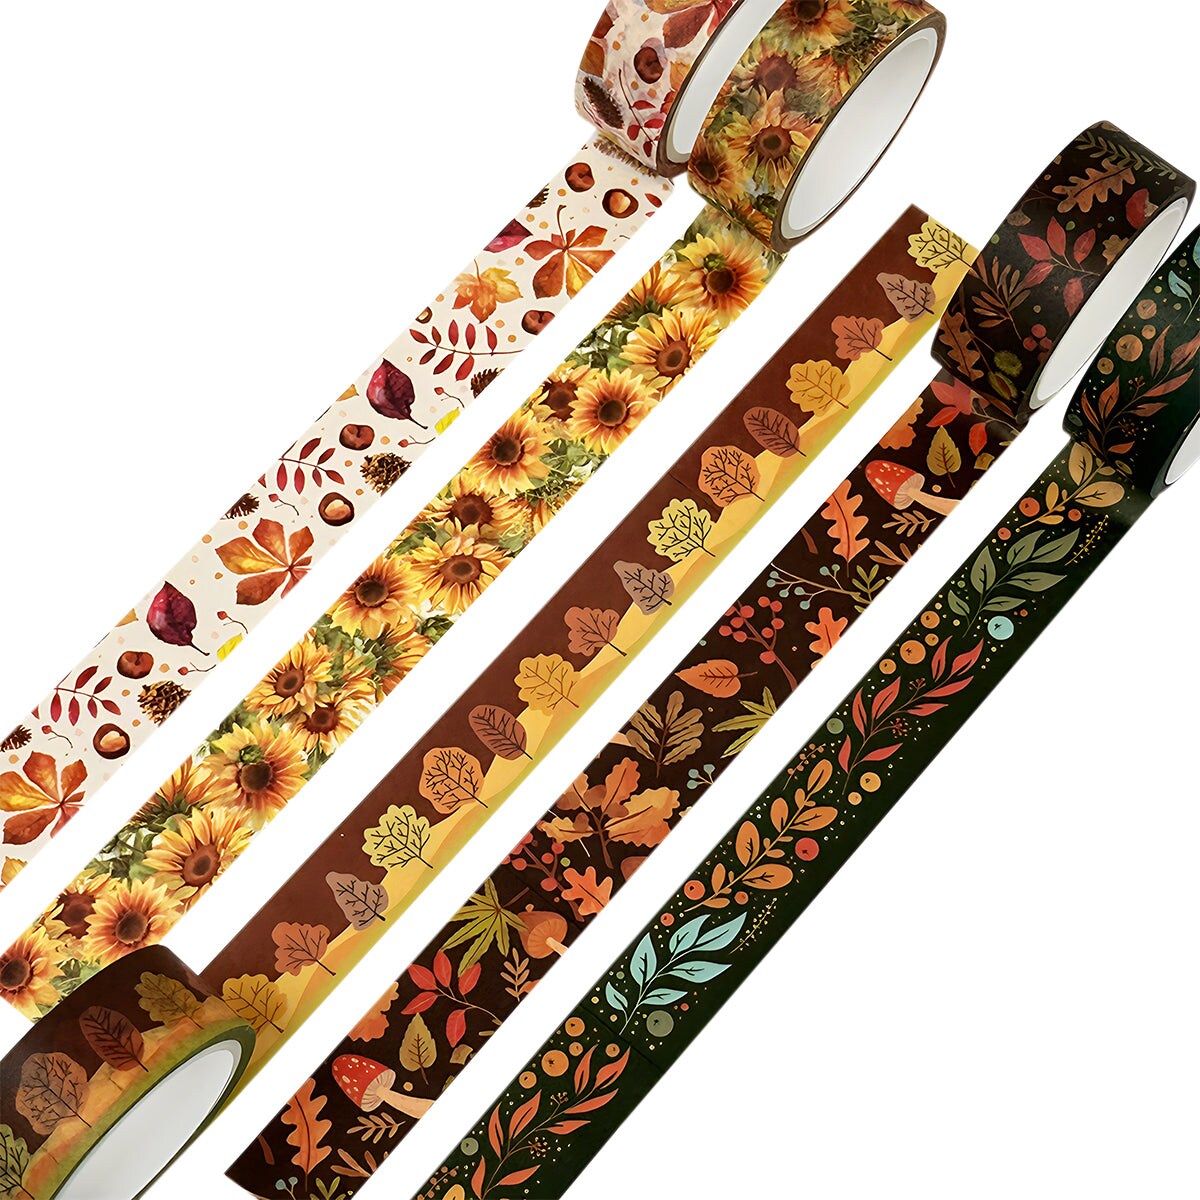 Wrapables Decorative Washi Tape for Scrapbooking, Stationery, Diary, Card Making (10 Rolls), Autumn Day